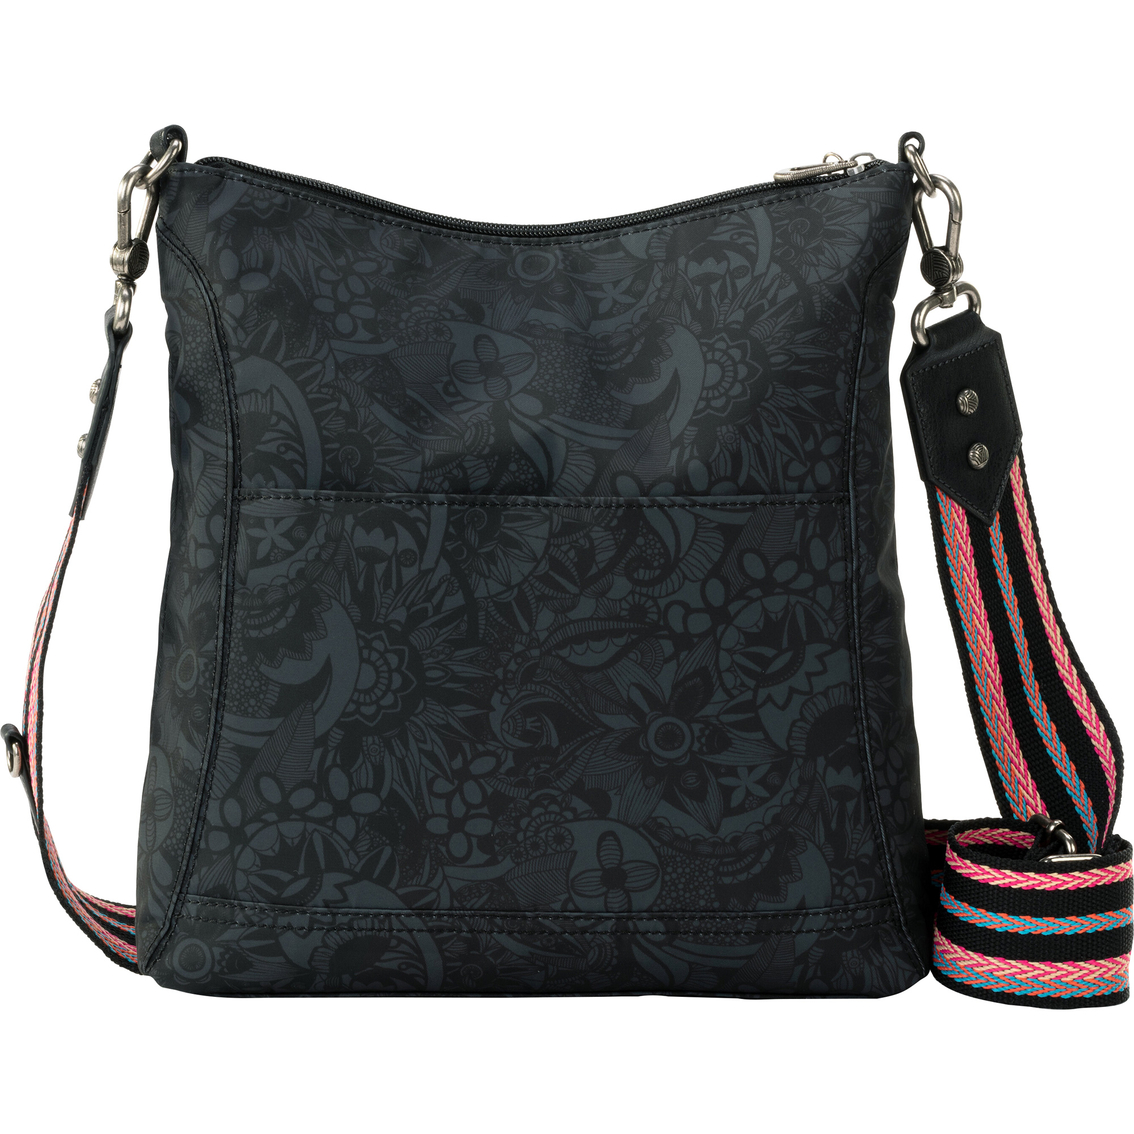 Sakroots Lucia Crossbody - Image 2 of 7